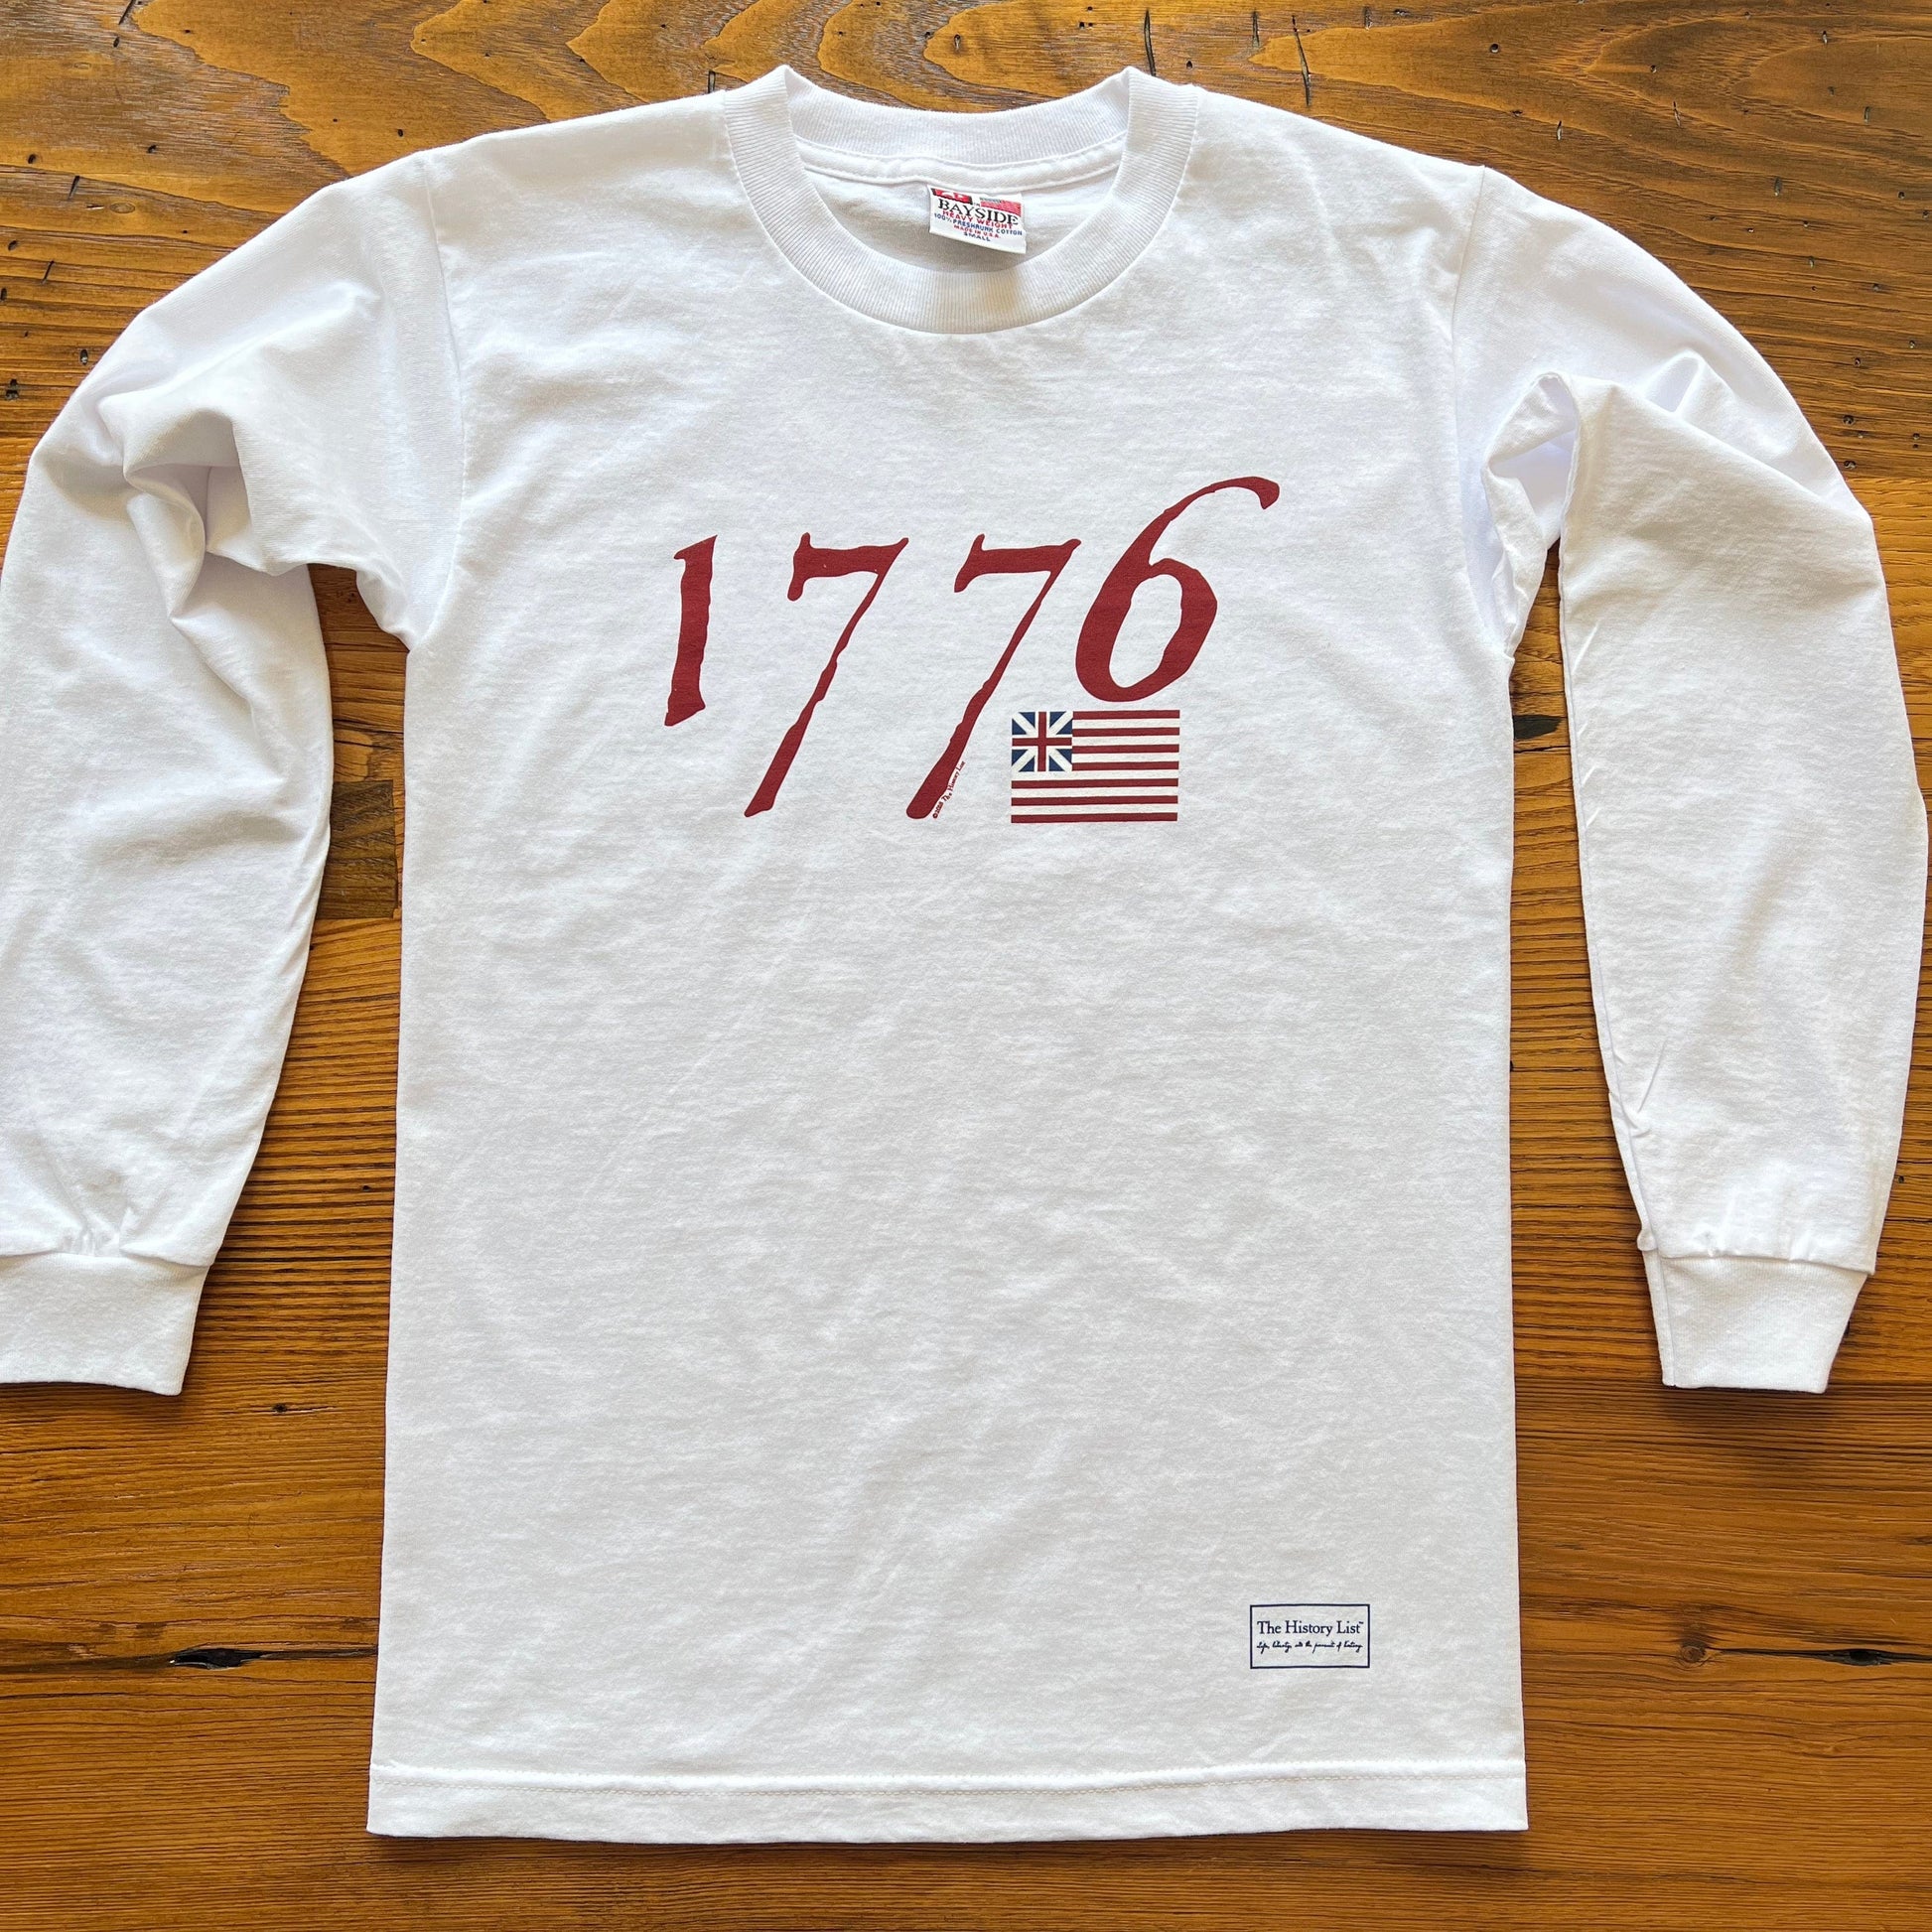 White "We hold these truths - July 4, 1776” Long-sleeved shirt from the history list store